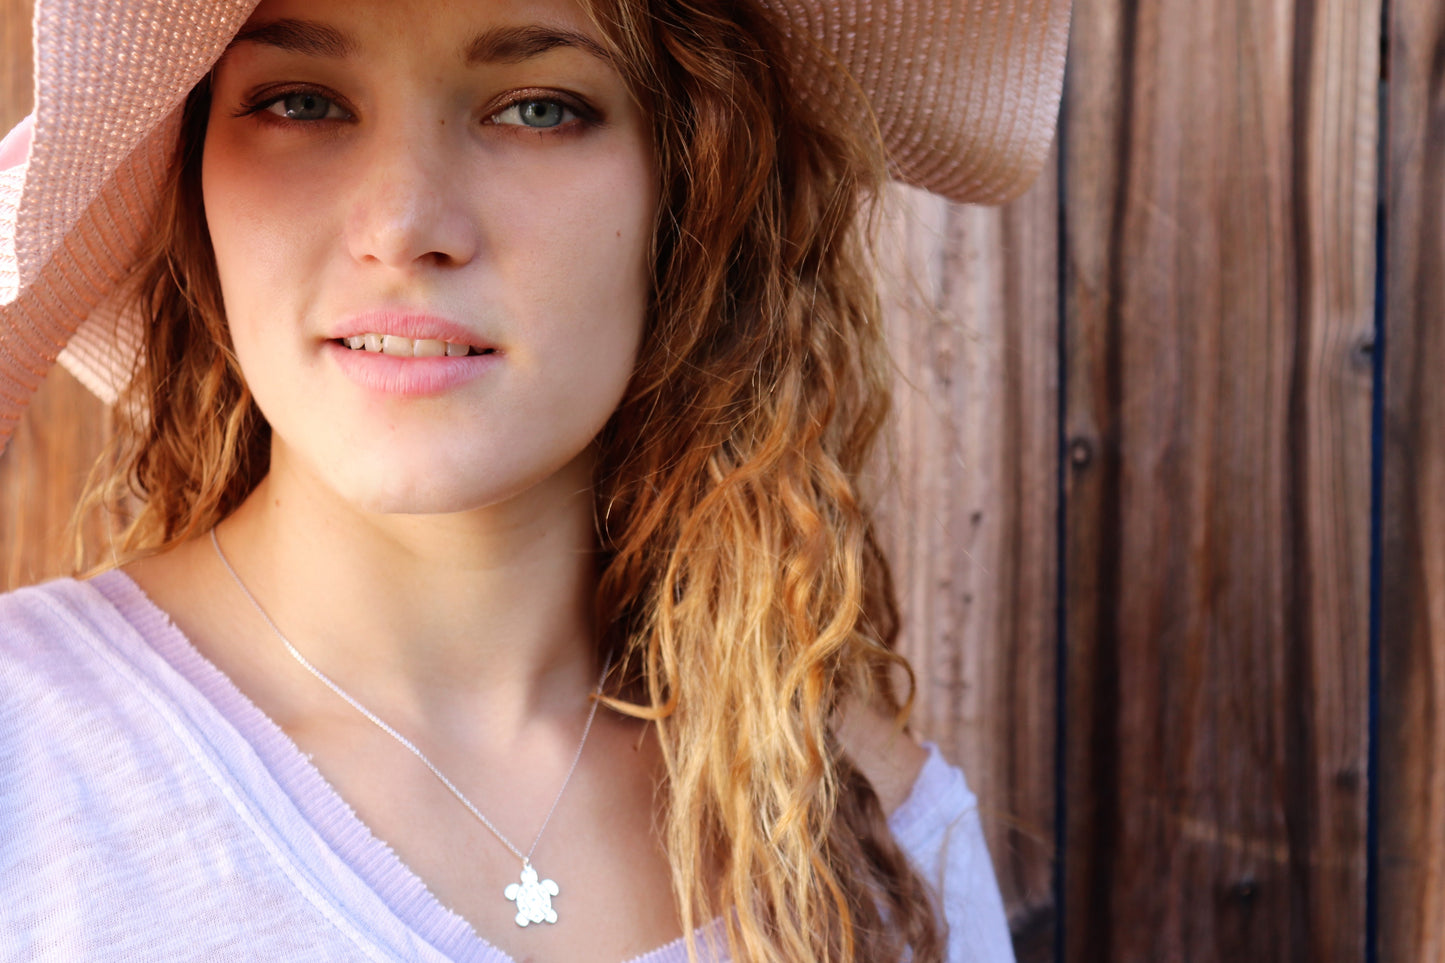 Diamond turtle necklace on woman wearing a straw hat and t-shirt from the wandering jewel